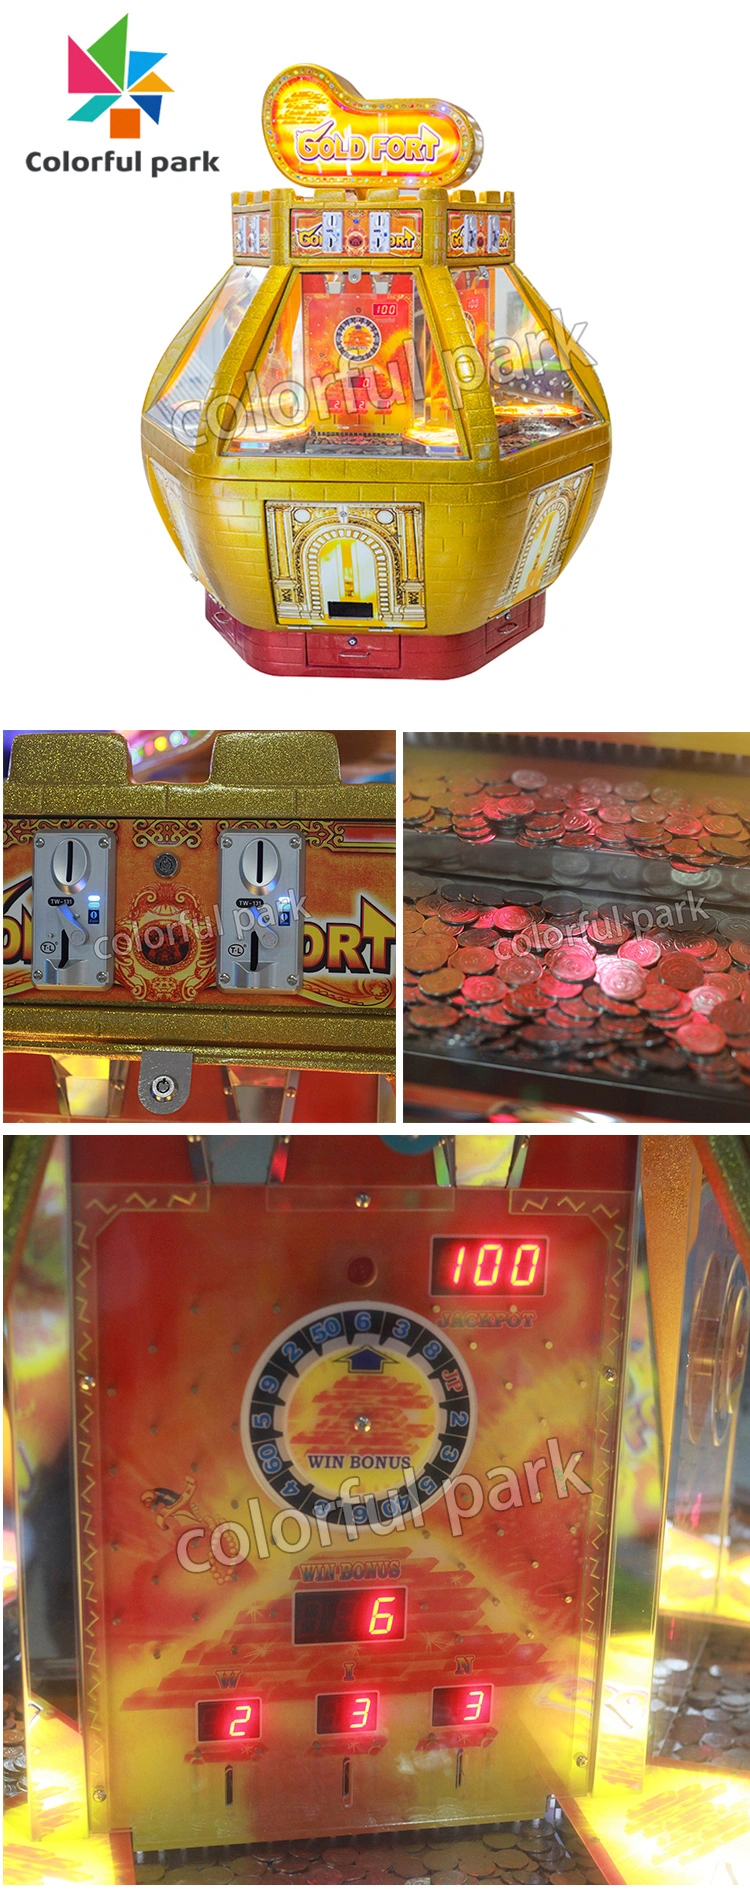 Colorful Park Gold Fort Coin Pusher Game Simulator Prize Lottery Game Machine